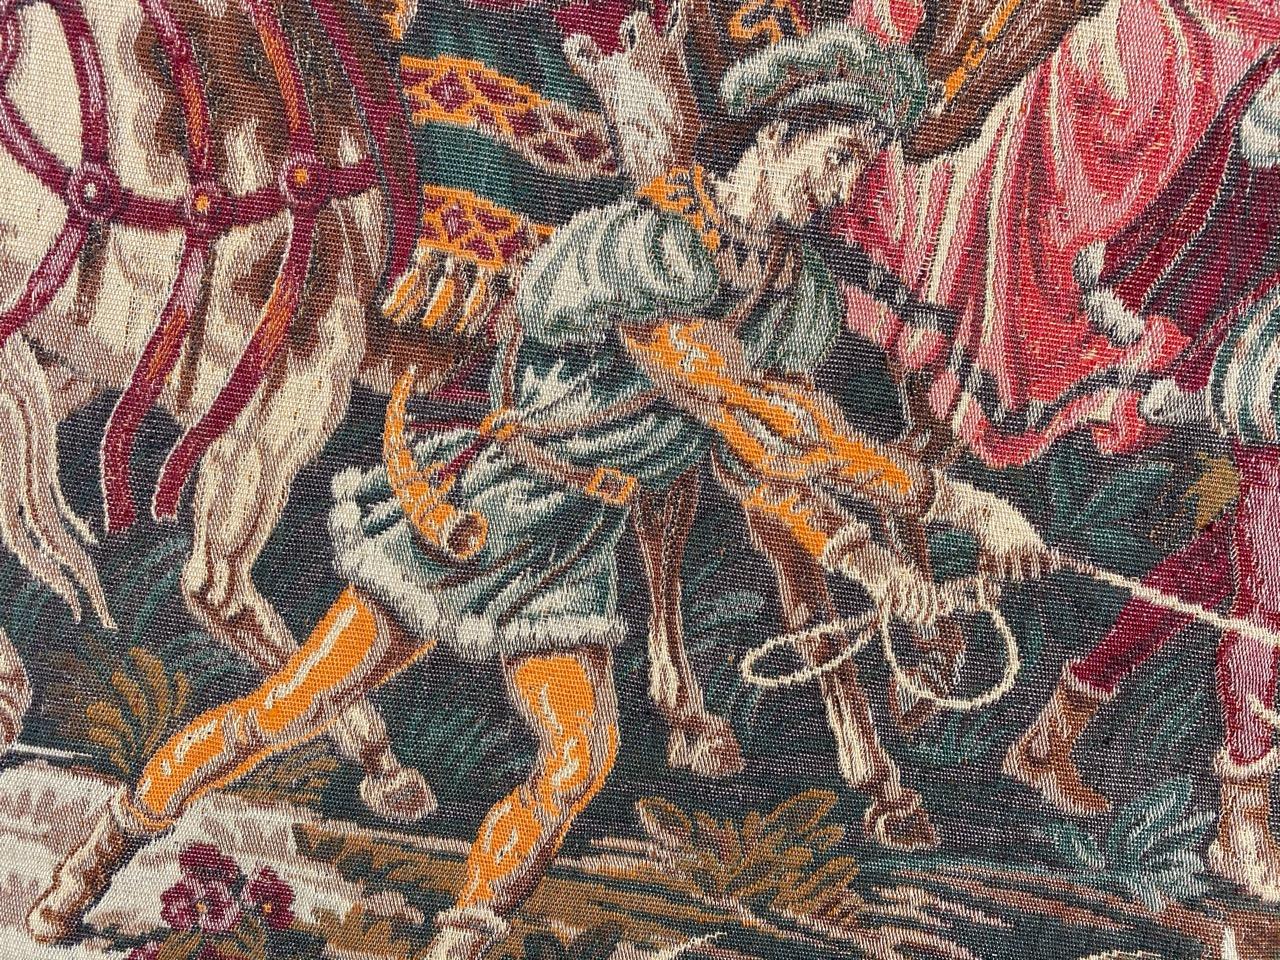 Bobyrug’s Beautiful Hunting French jacquard tapestry in Aubusson style  For Sale 1